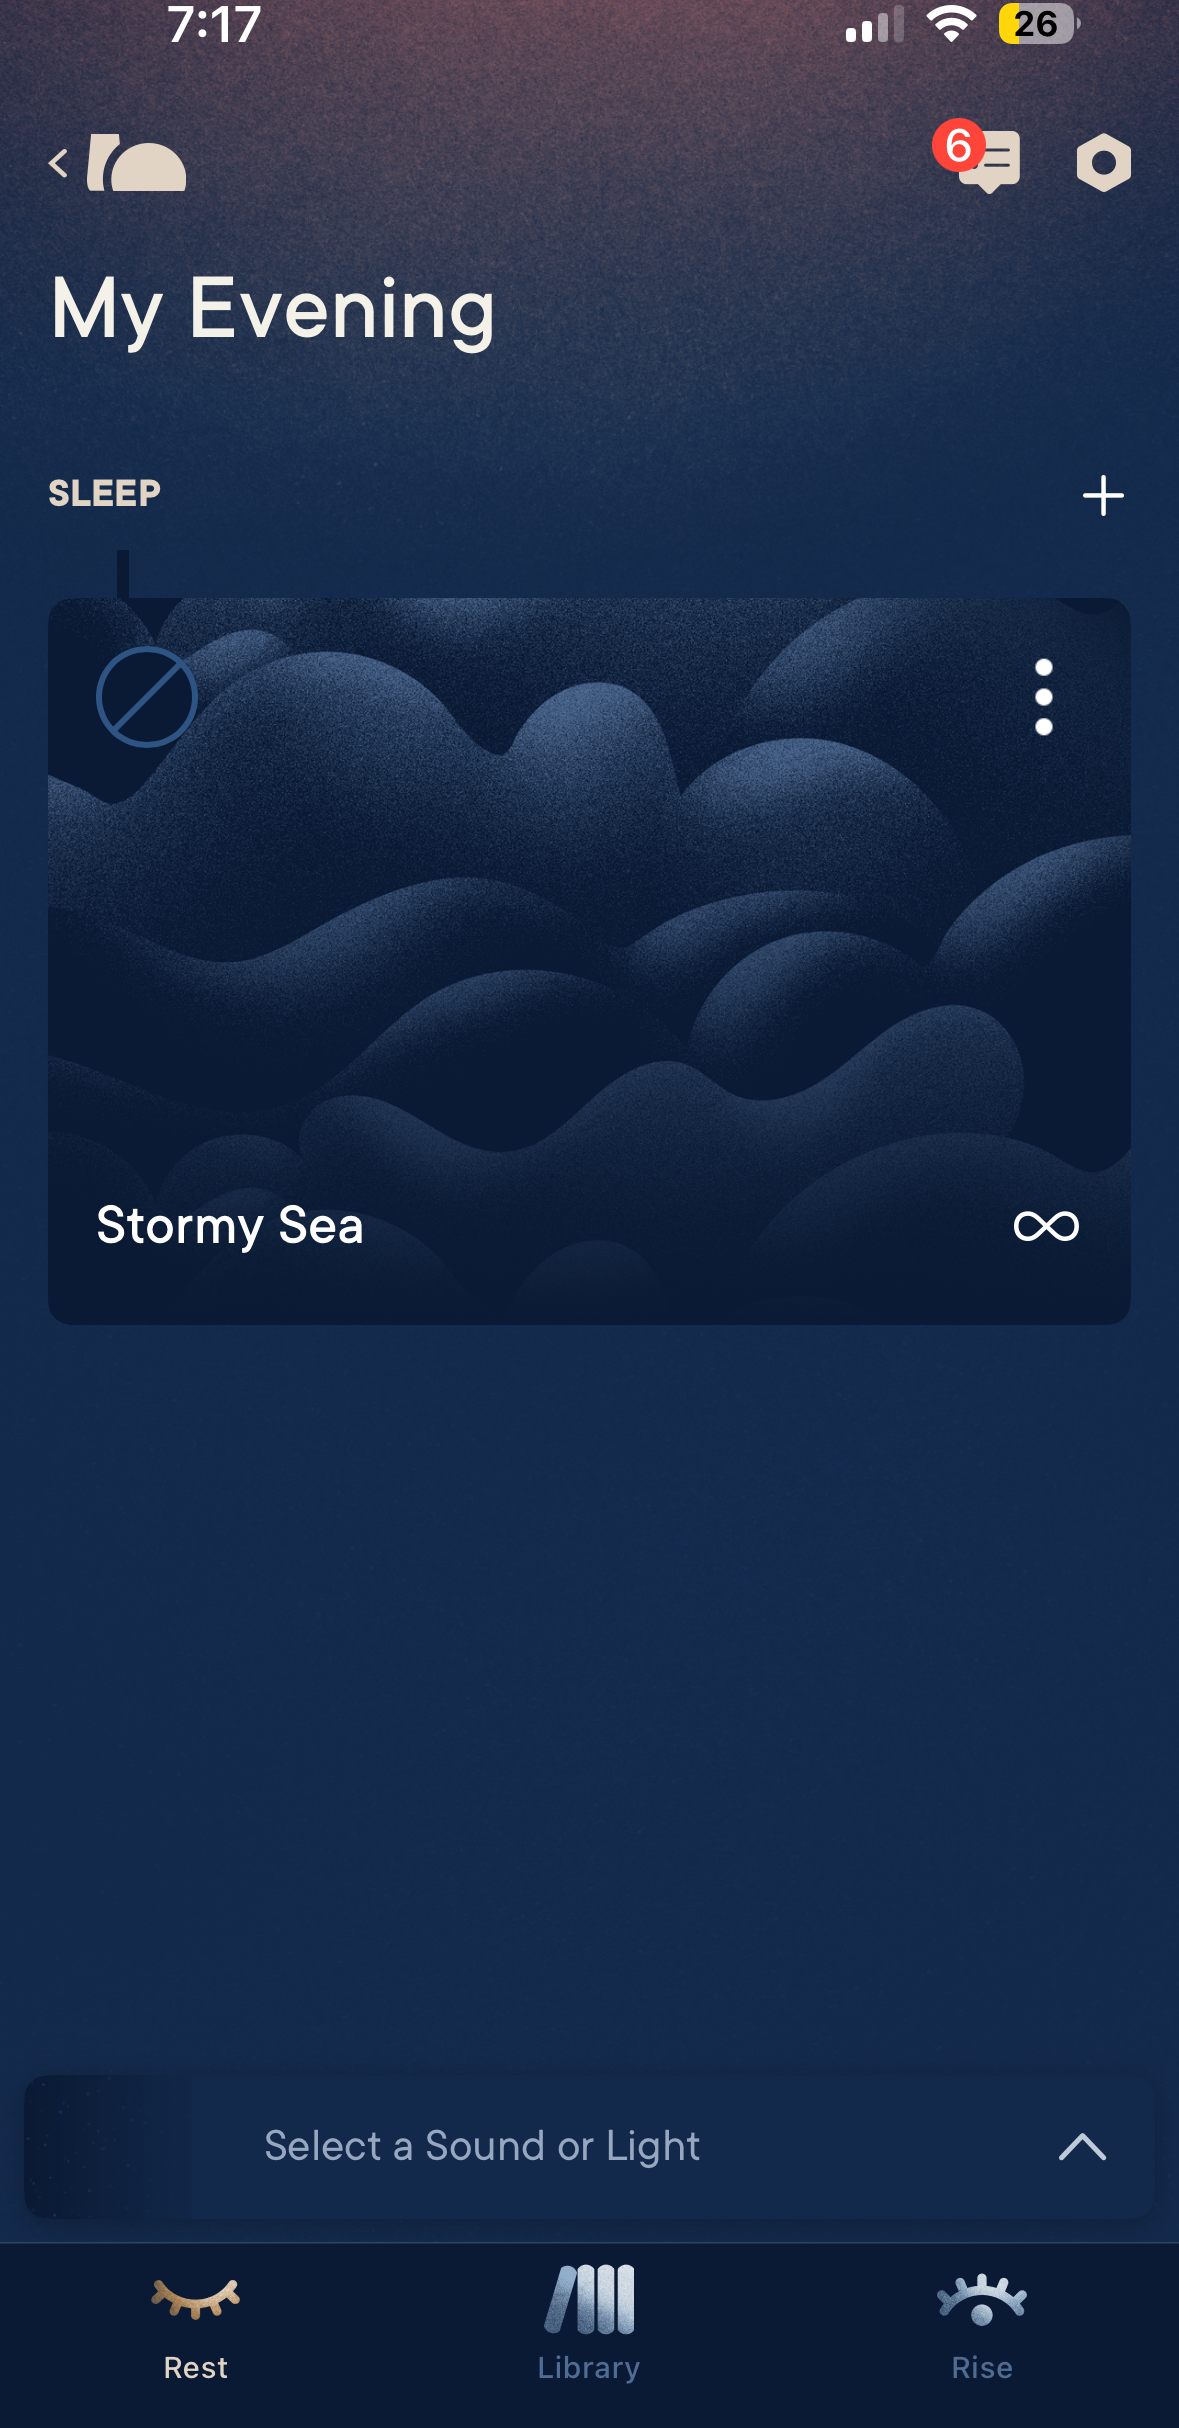 Sleep app interface with &#x27;Stormy Sea&#x27; sound option selected for a relaxing evening routine